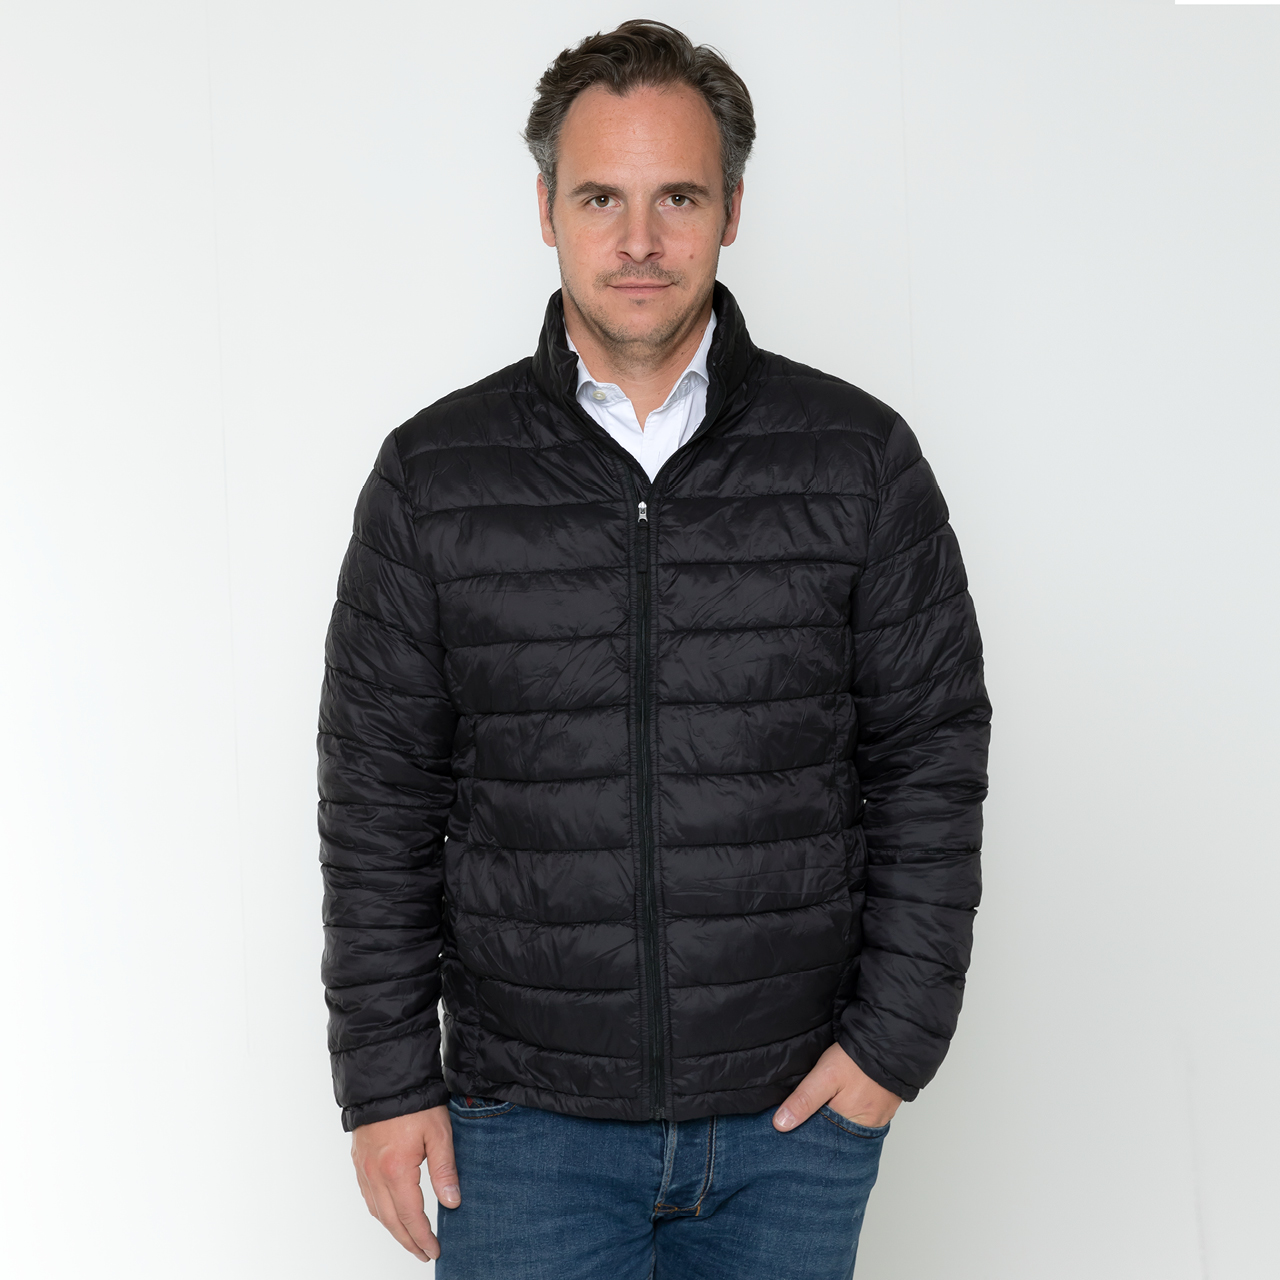 Quilted Jackets for men's in black S/M